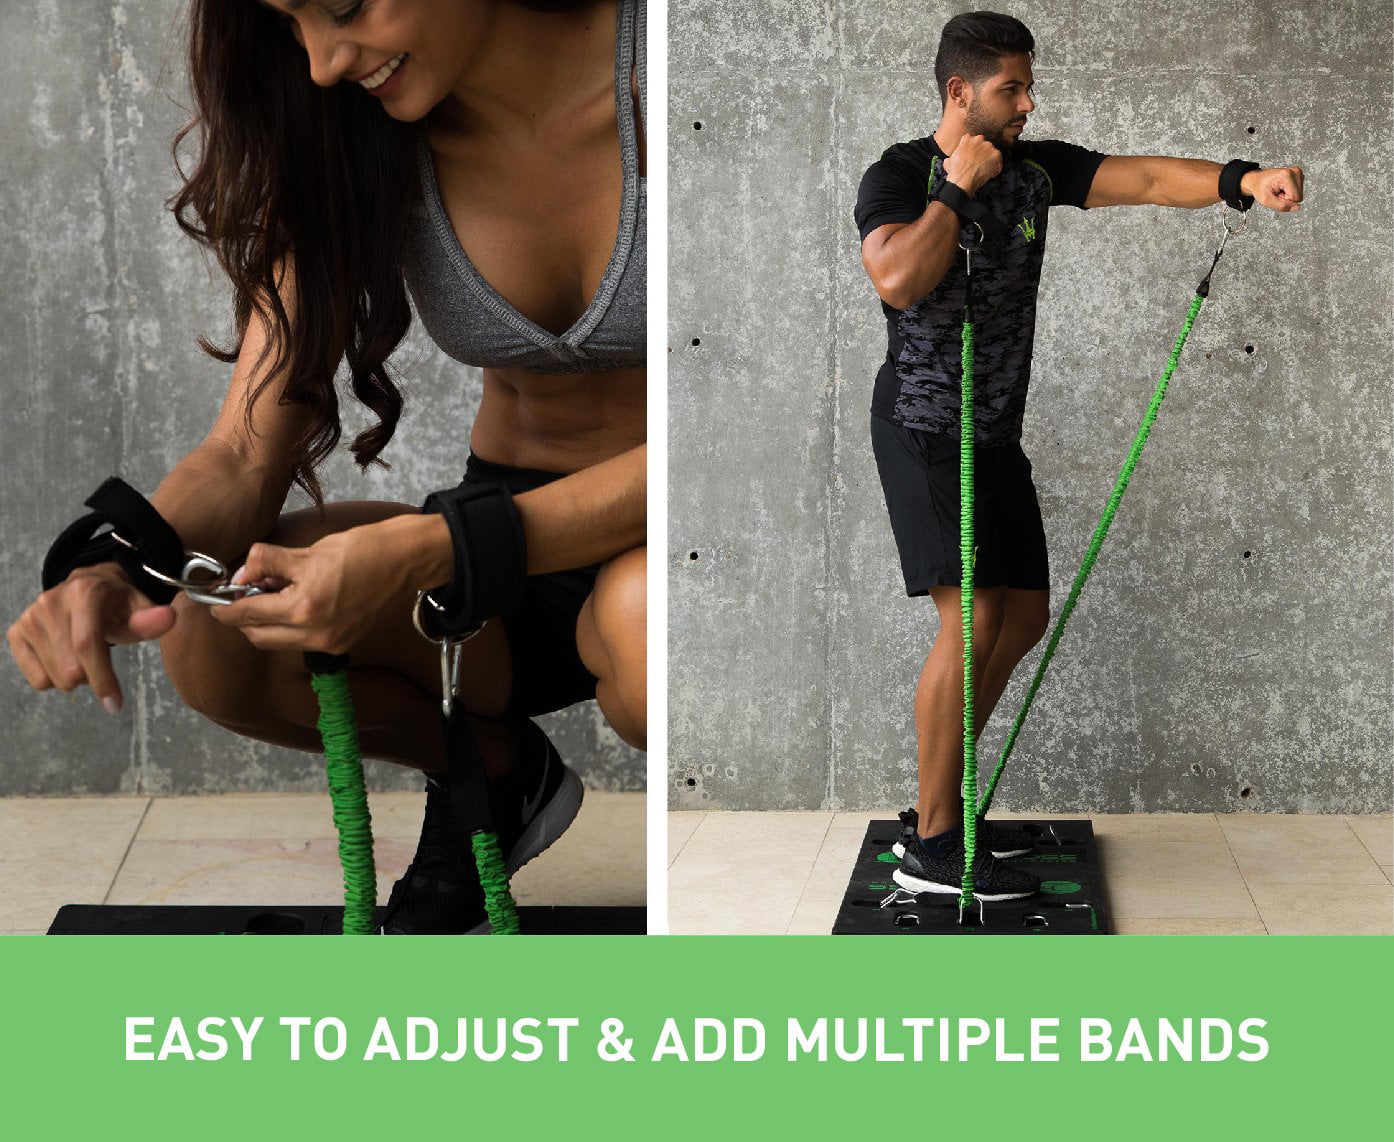 Travel or Outside BodyBoss Home Gym 2.0 Full Body Workouts for Home Full Portable Gym Home Workout Package Silver 1 Set of Resistance Bands Collapsible Resistance Bar Handles 